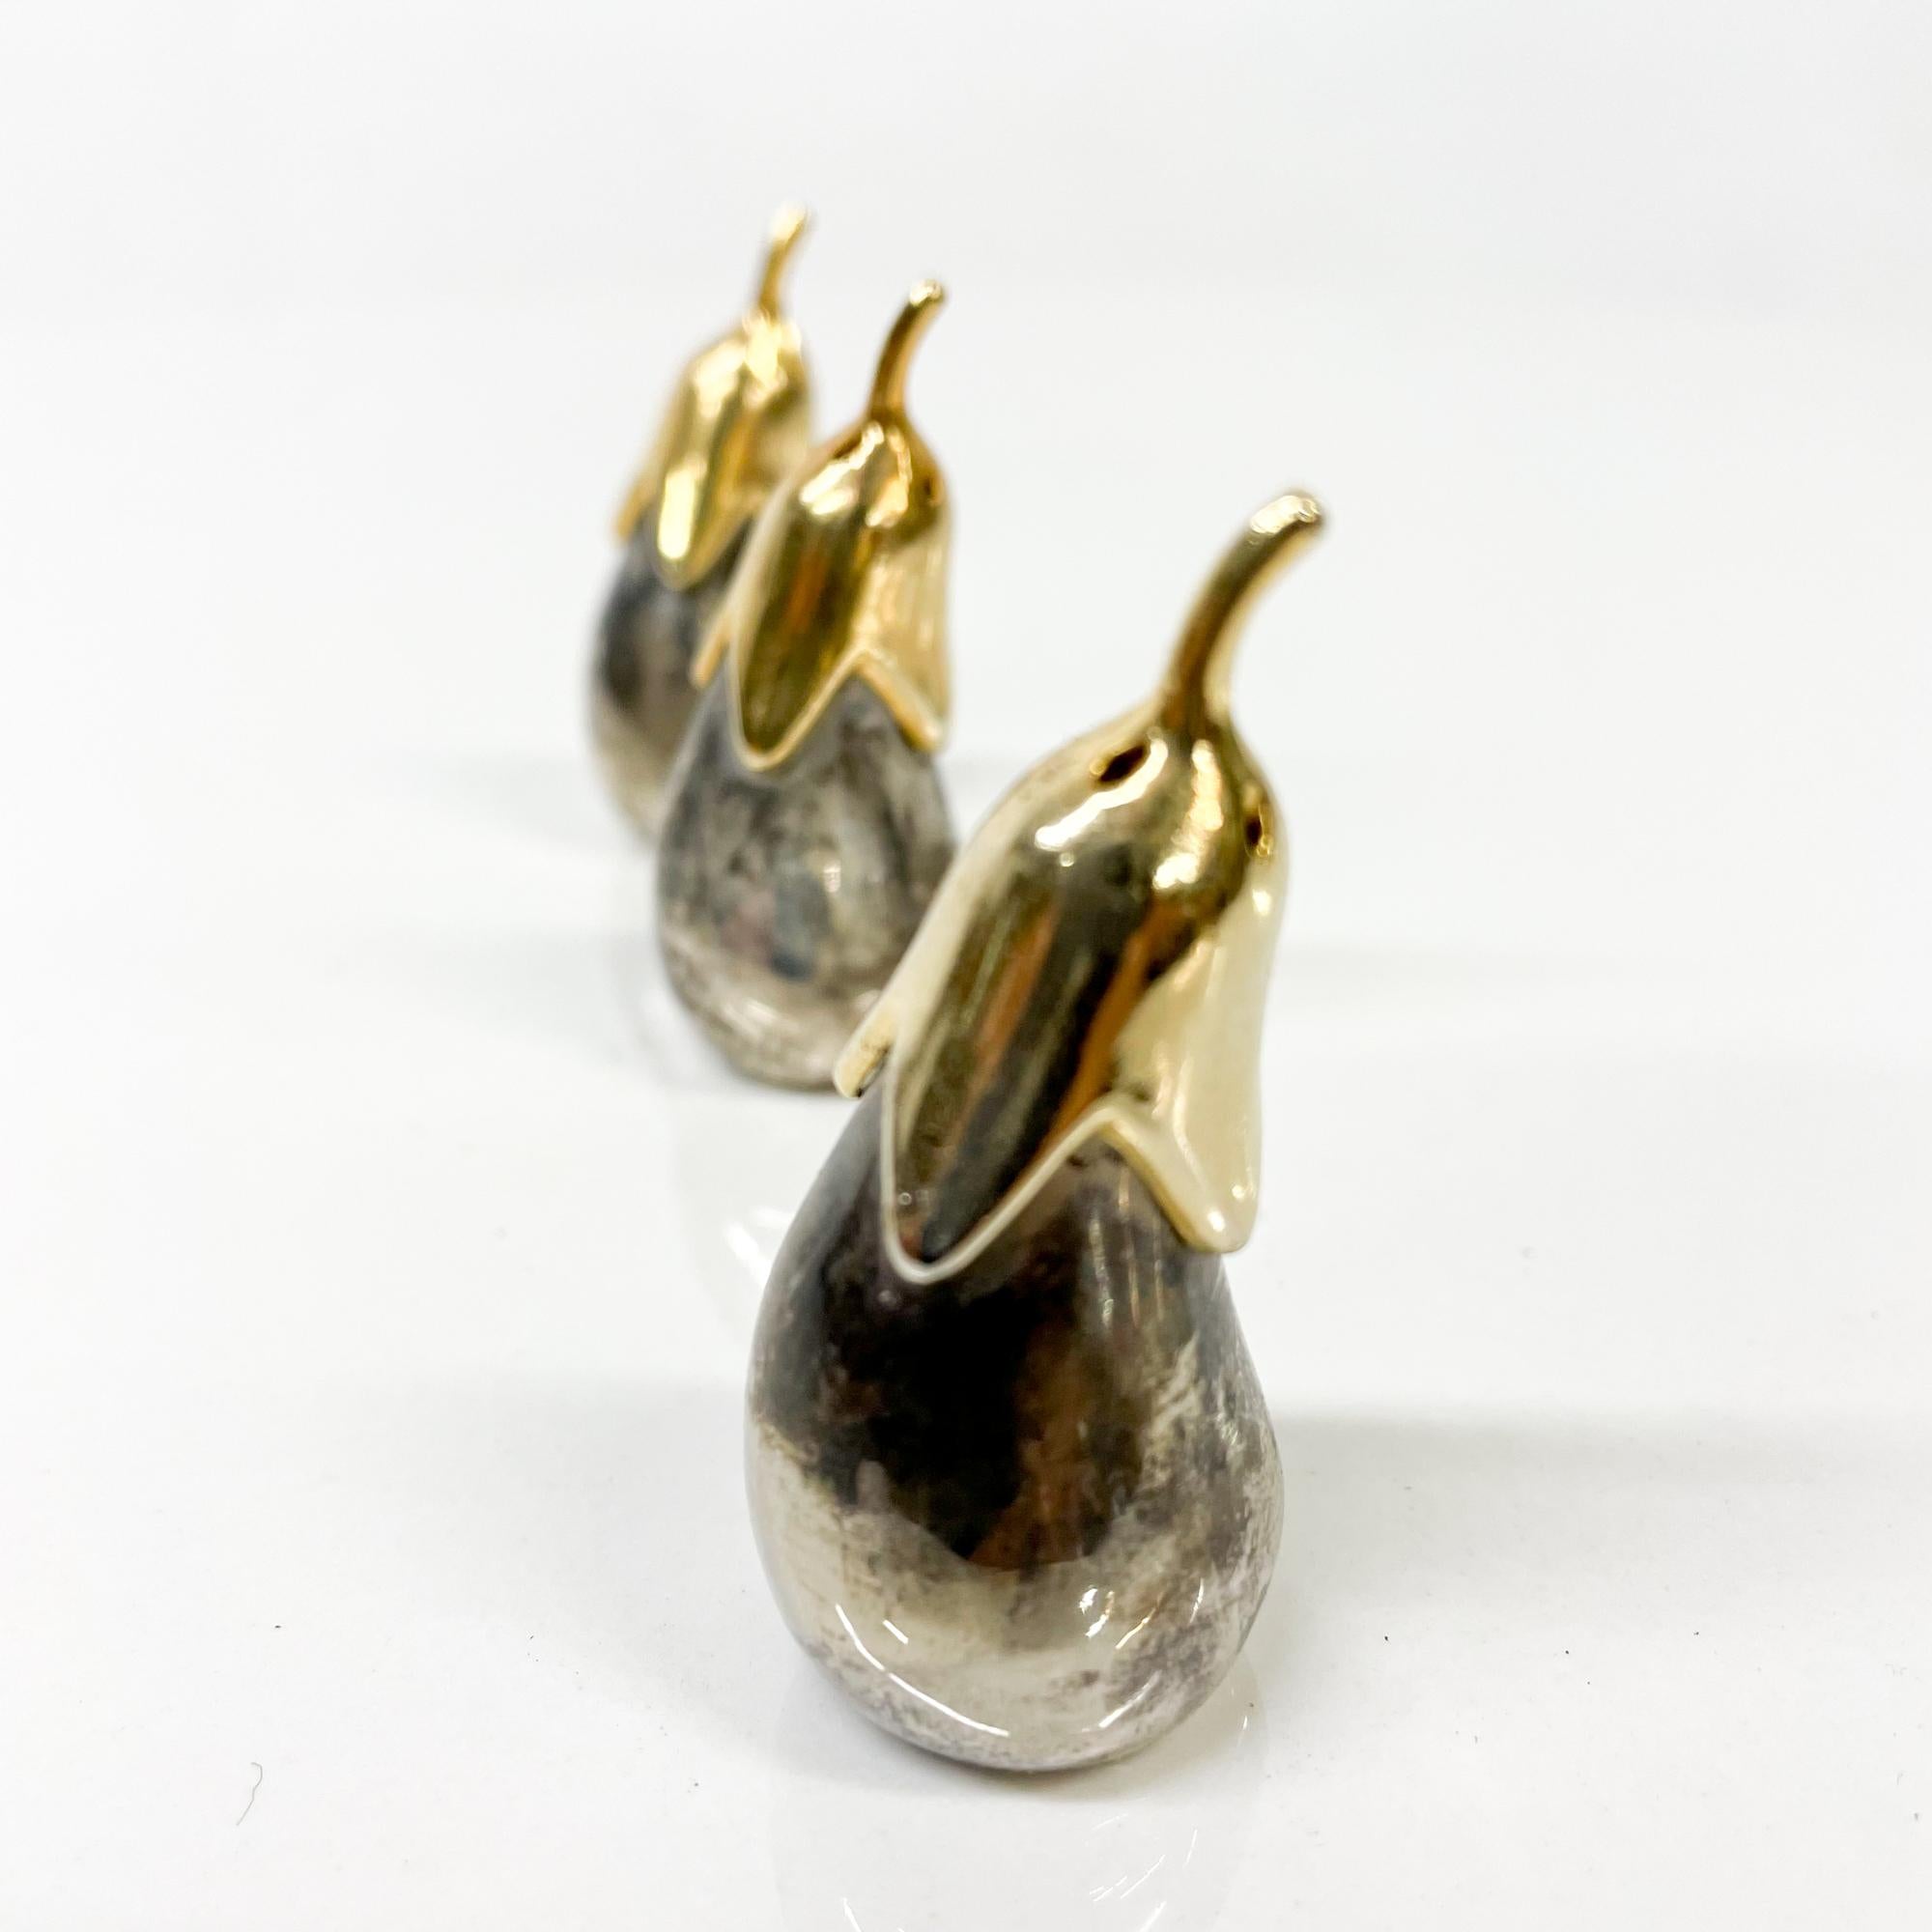 Silver Plate 1980s Set of Three Saltshakers Eggplant Shaped in Silverplate & Brass